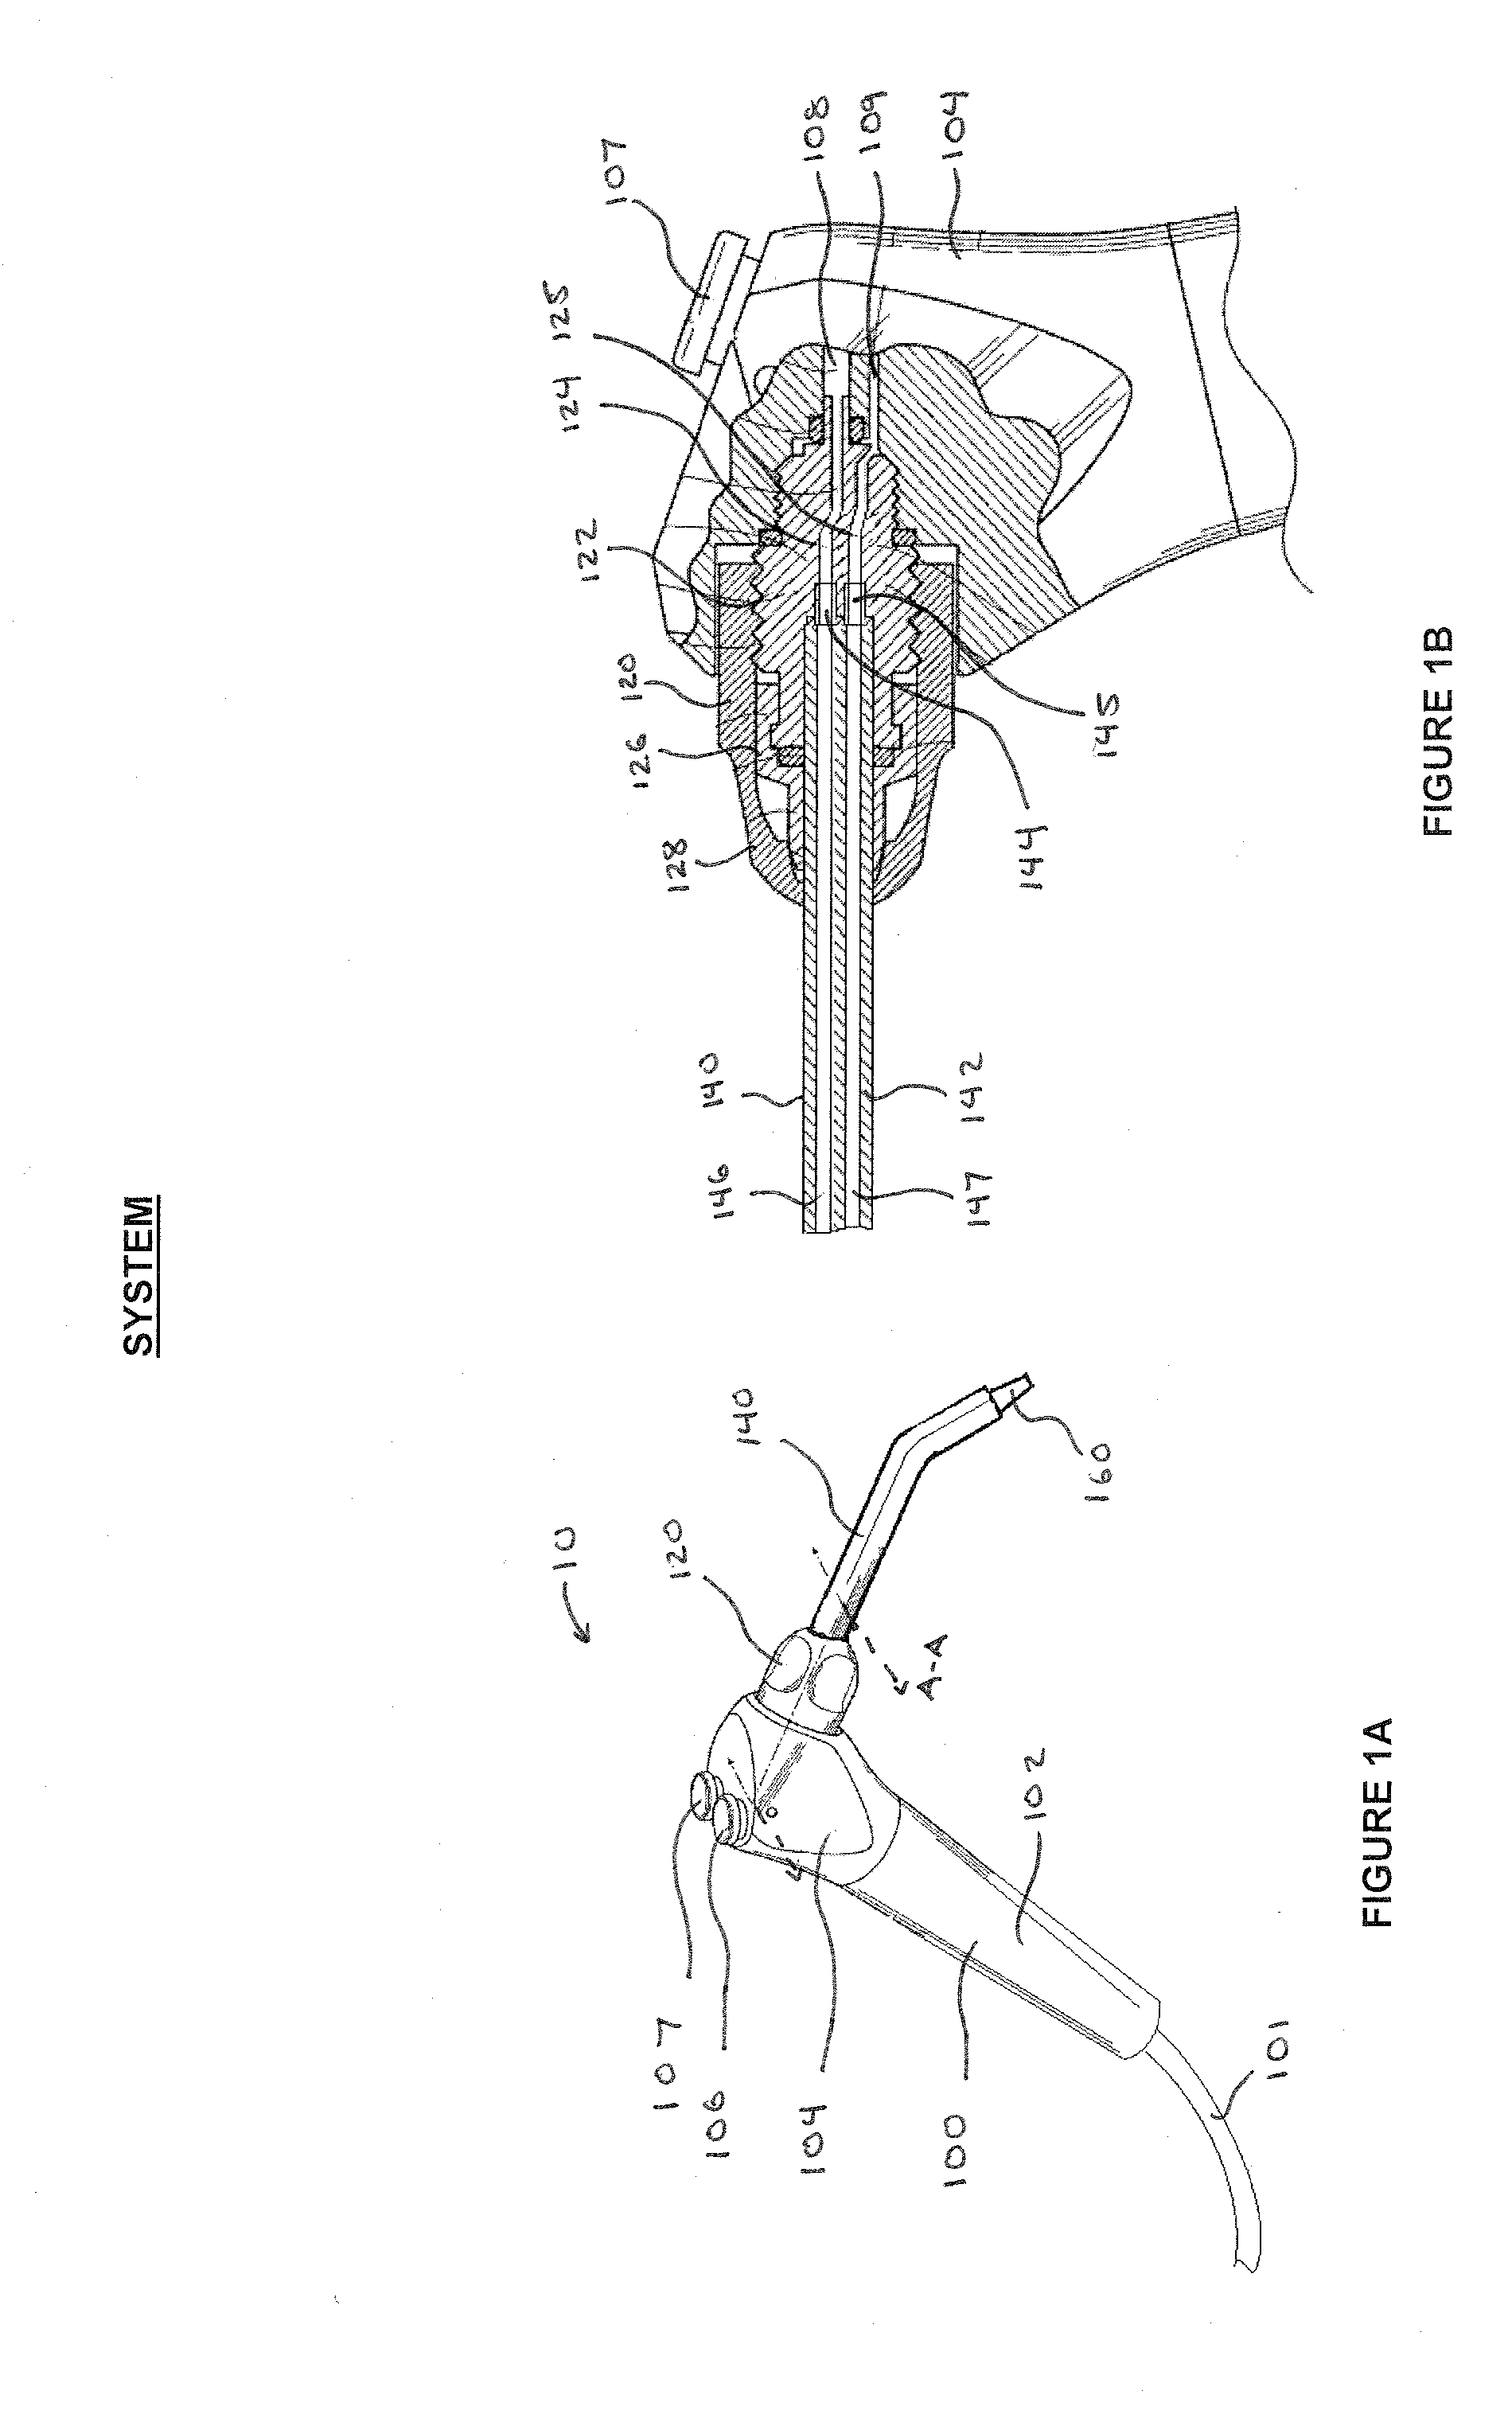 Dental syringe tip devices, systems and methods